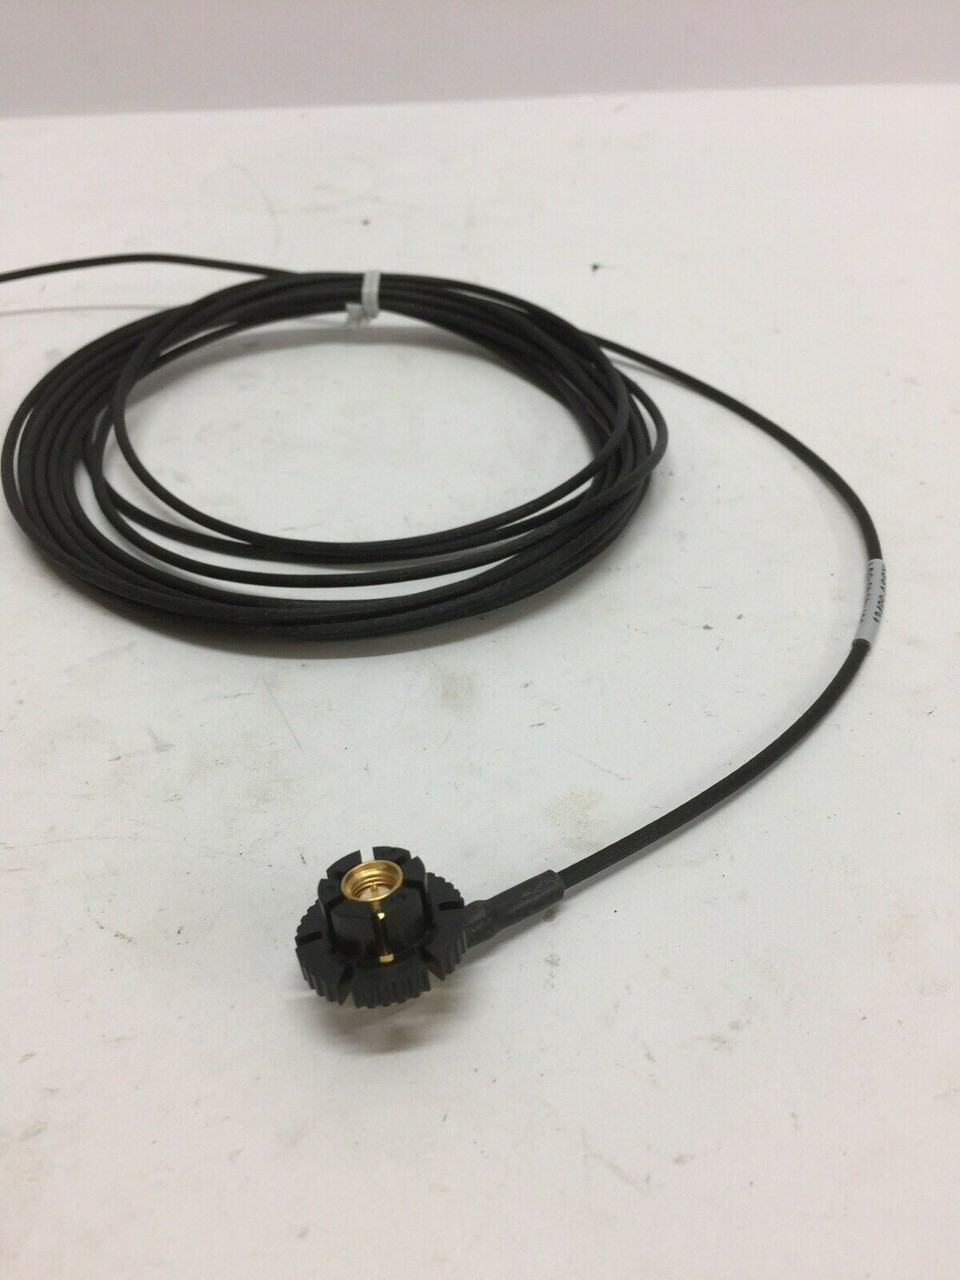 Radio Frequency Cable Assembly 987-4640-001 Rockwell Collins 